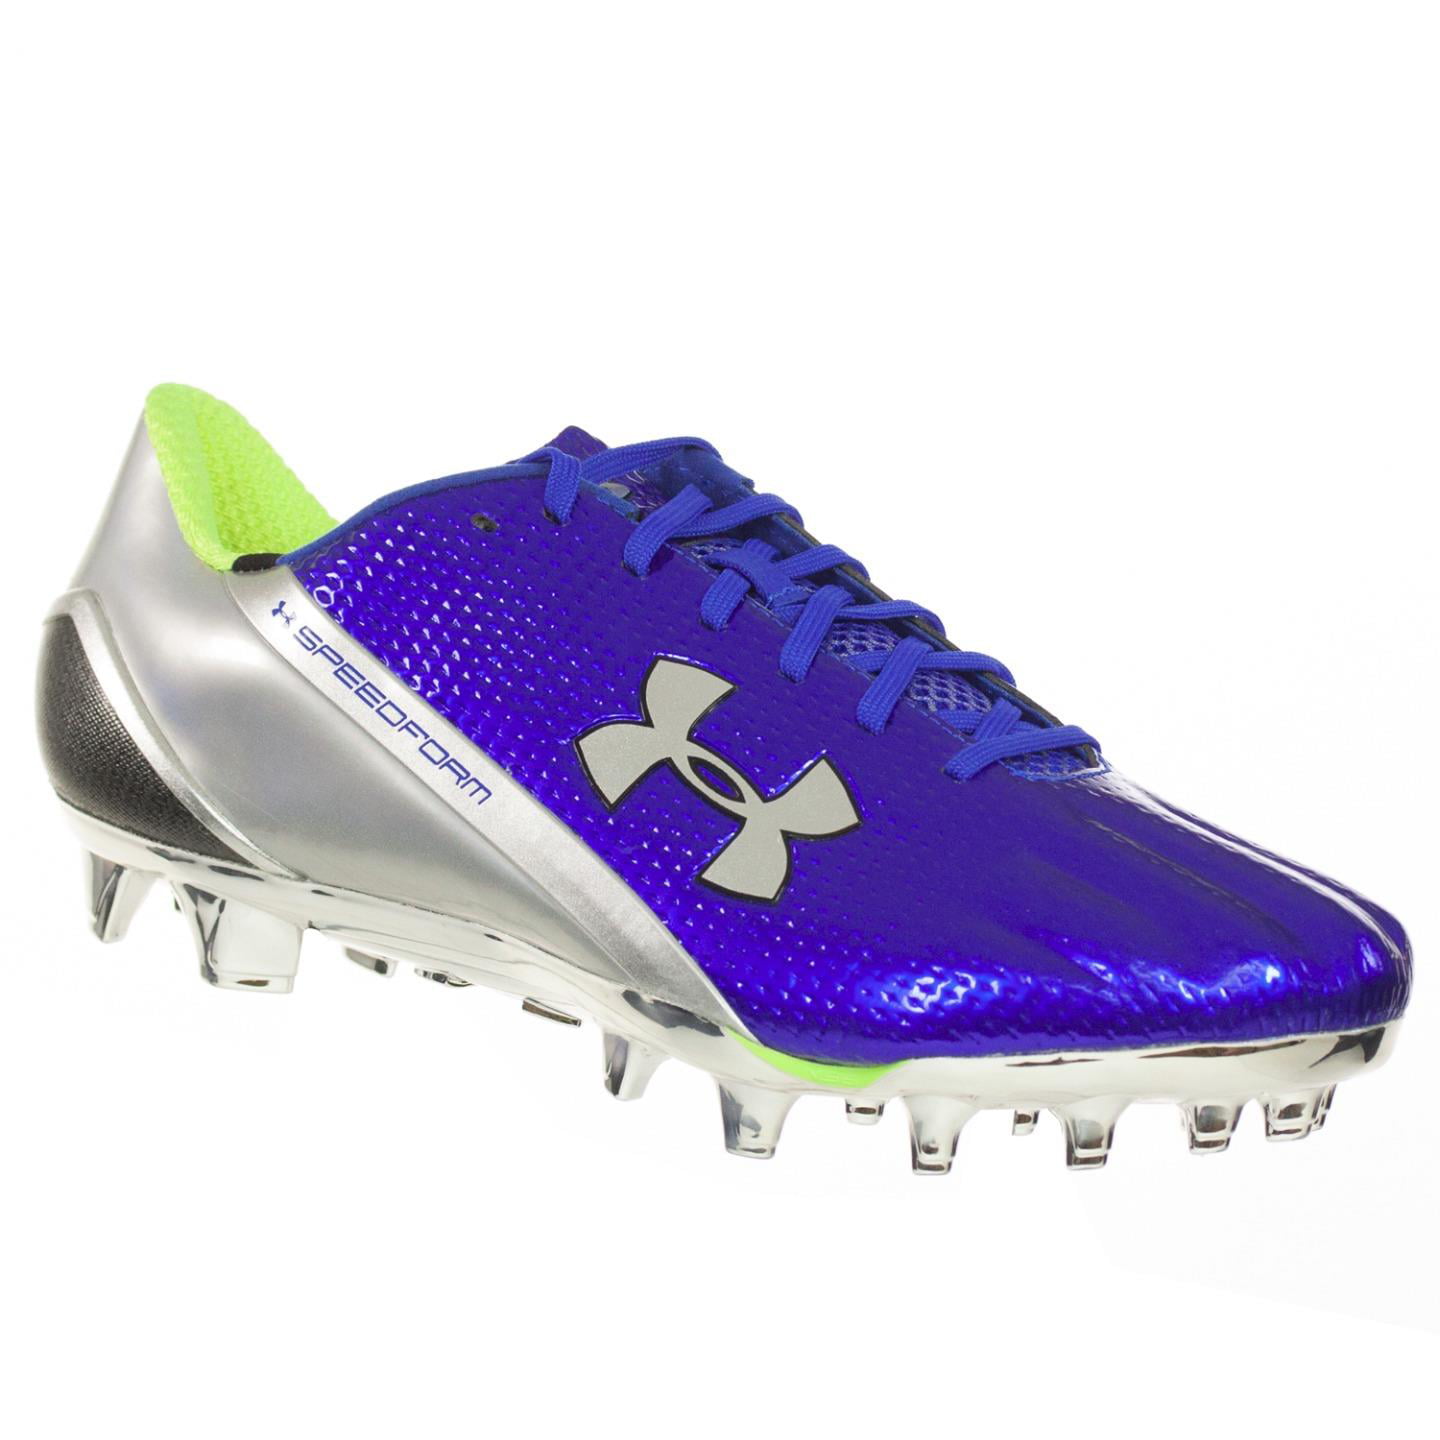 UNDER ARMOUR MEN'S FOOTBALL CLEATS 